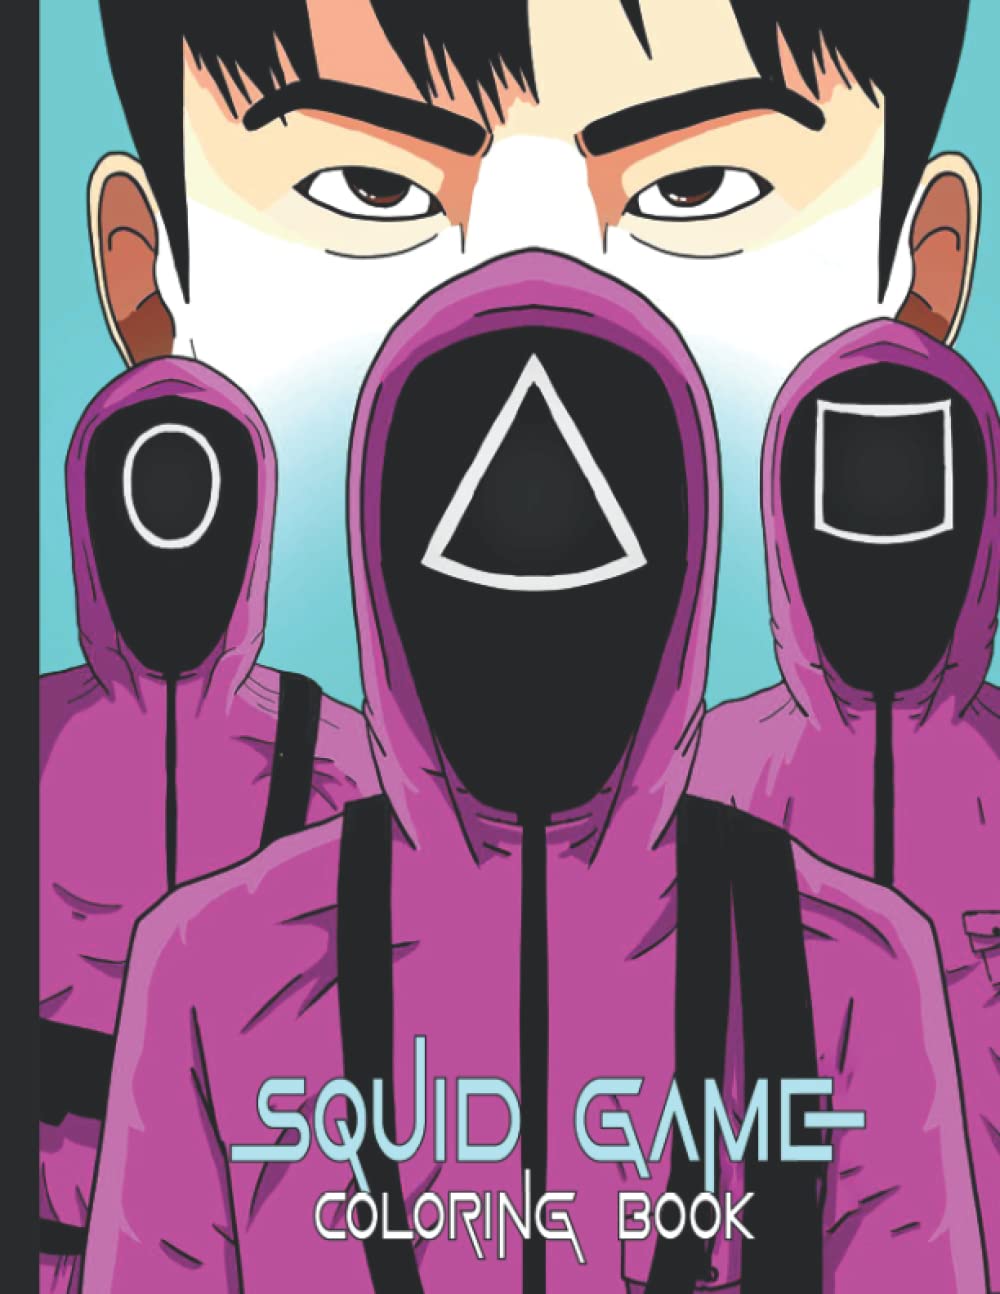 Squid games inspired coloring book squid game coloring book a great book with unique illustrations for relaxing and stress relieving